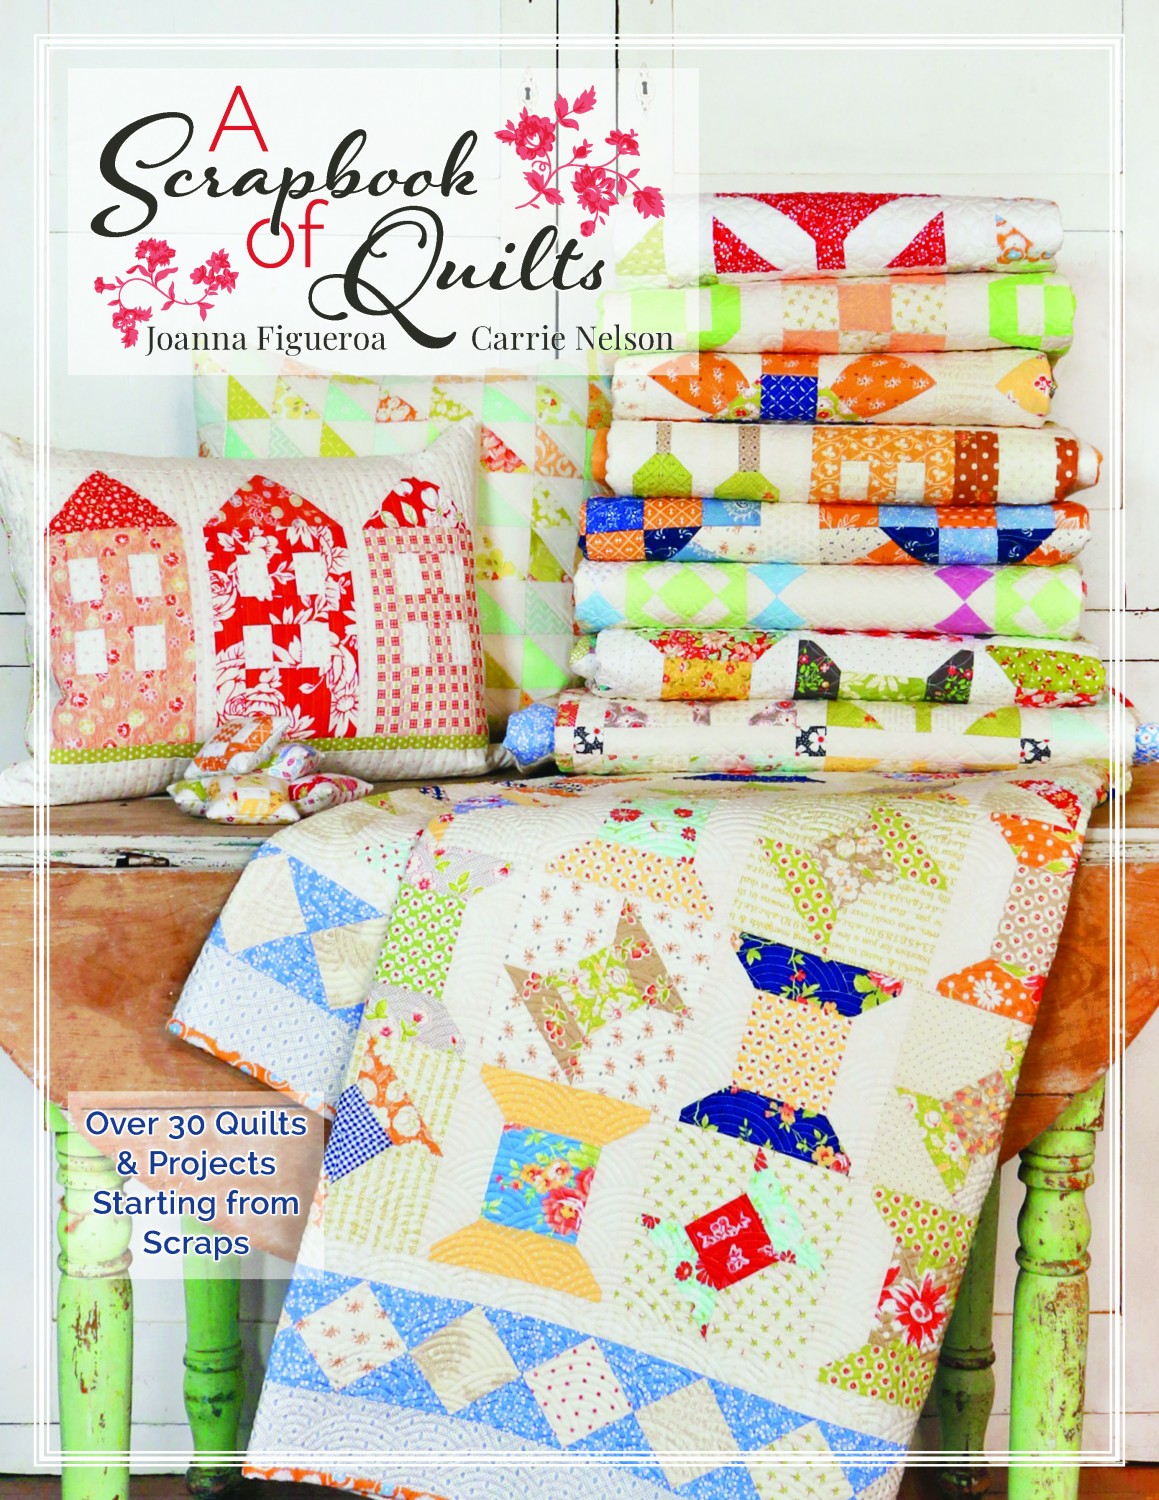 A Scrapbook Of Quilts Quilt Pattern Book by Carrie Nelson and Janna Fiueroa for It's Sew Emma